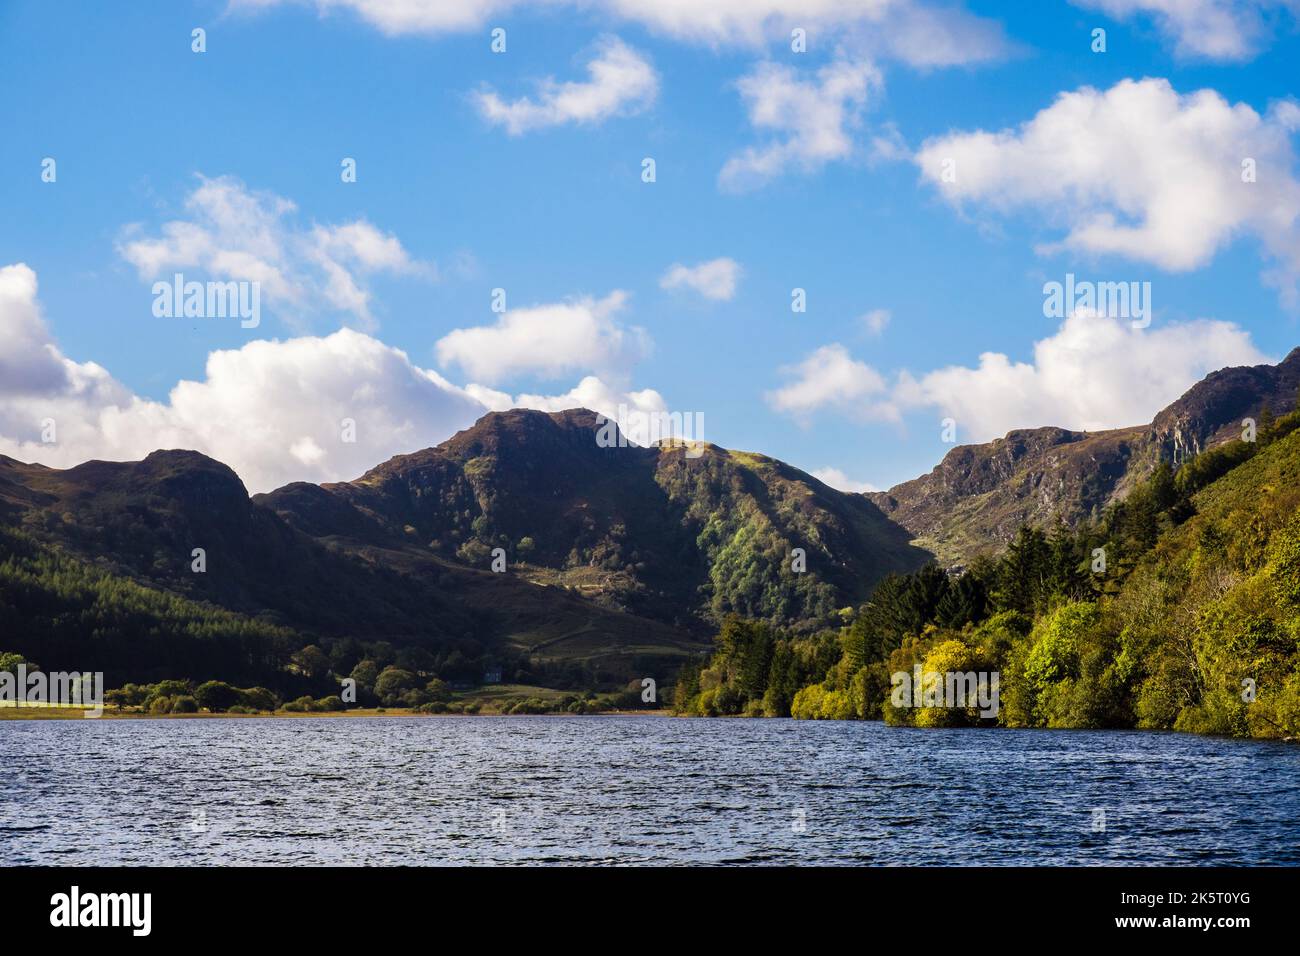 View across the choppy waters of Llyn Crafnant lake to Crimpiau in Snowdonia National Park. Betws-Y-Coed, Conwy, north Wales, UK, Britain Stock Photo